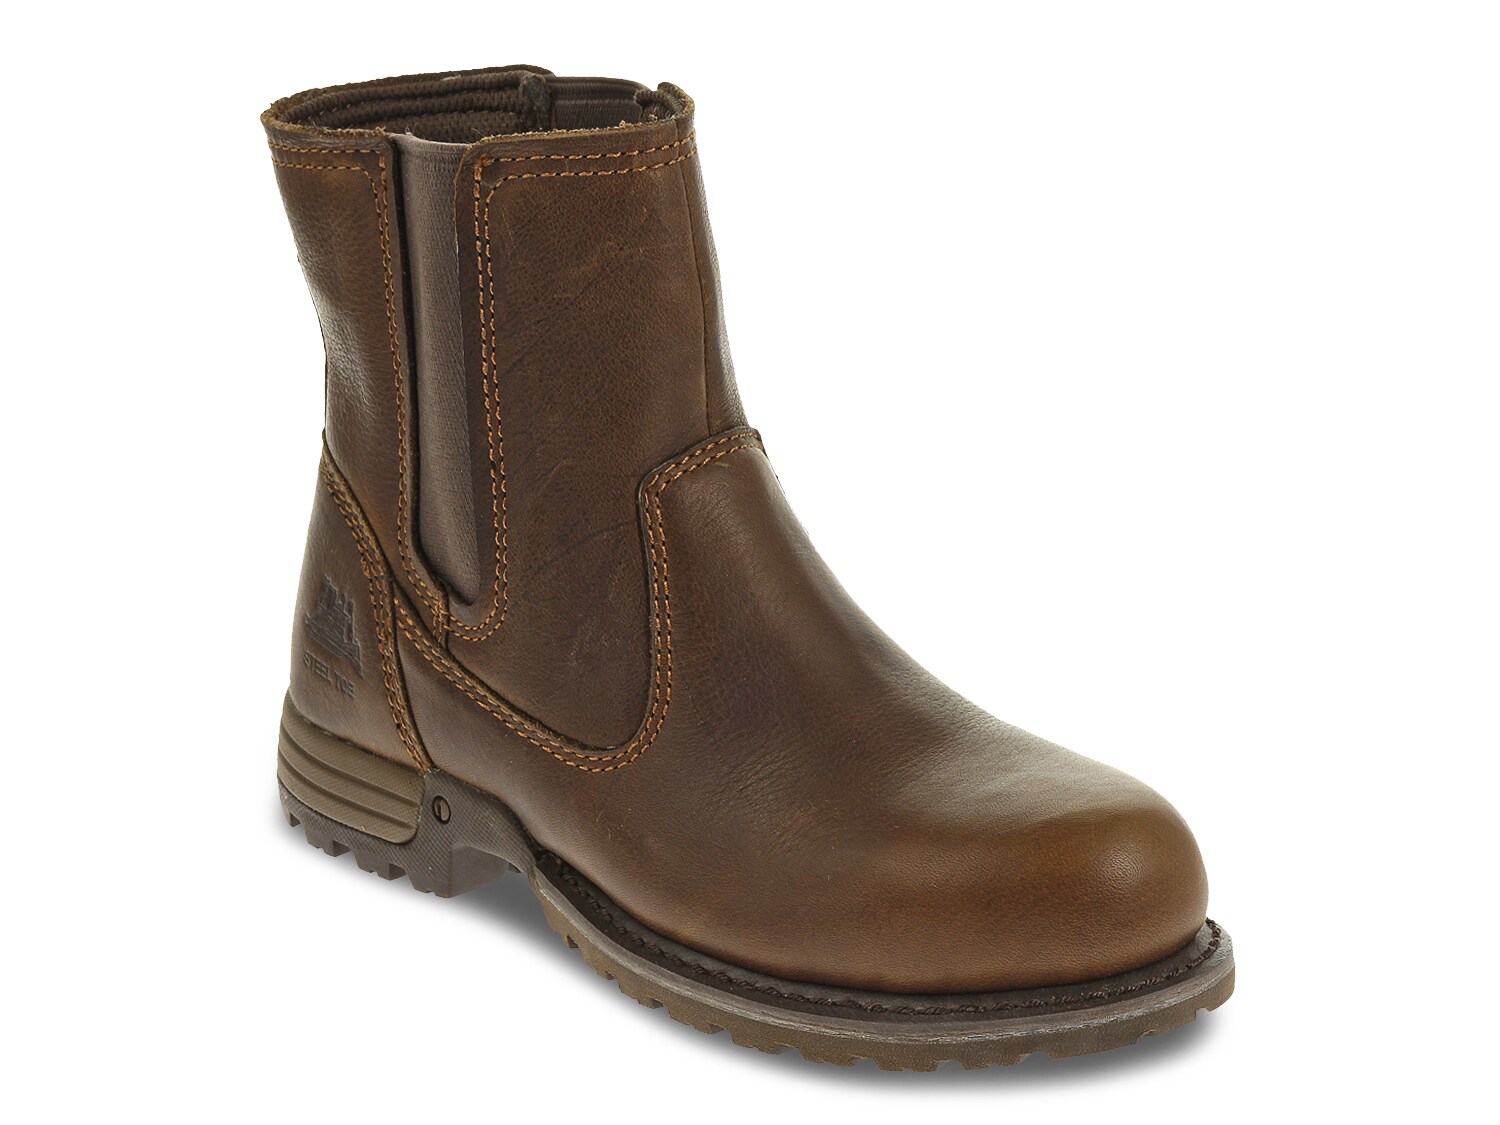 rockport works junction view work boot